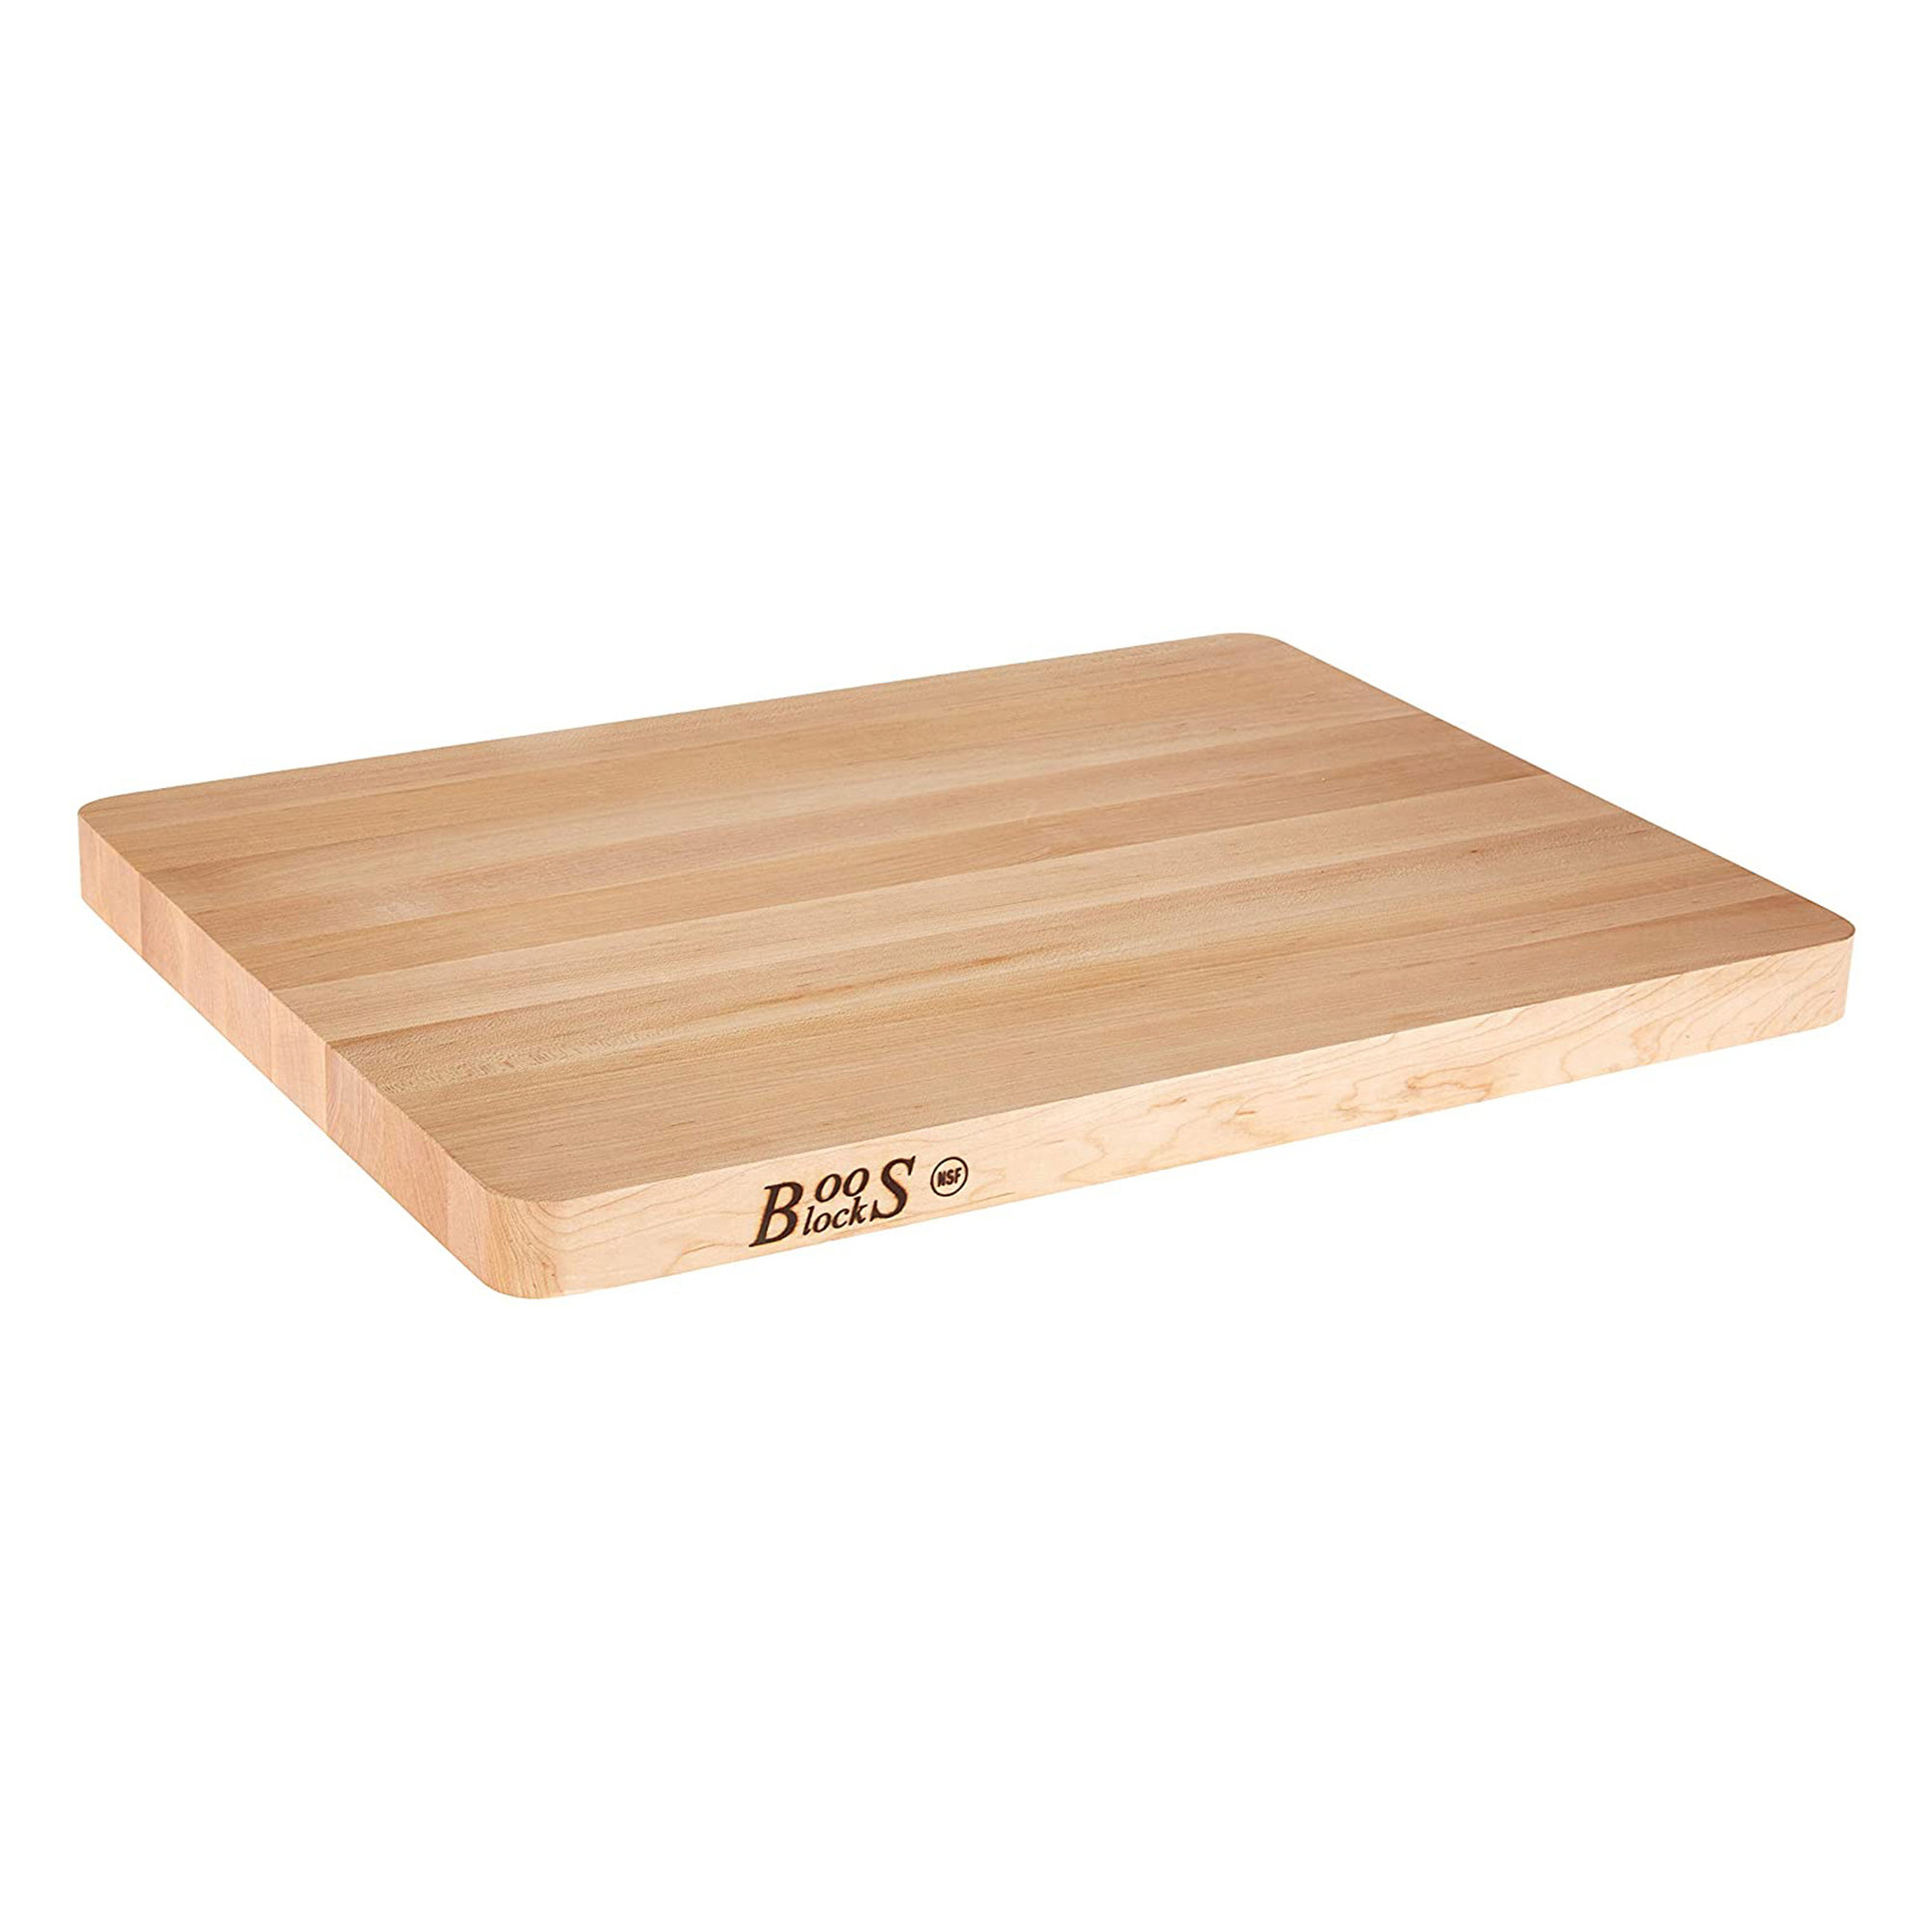 John Boos Maple Wood Cutting Board For Kitchen Prep 30 Inches X 23